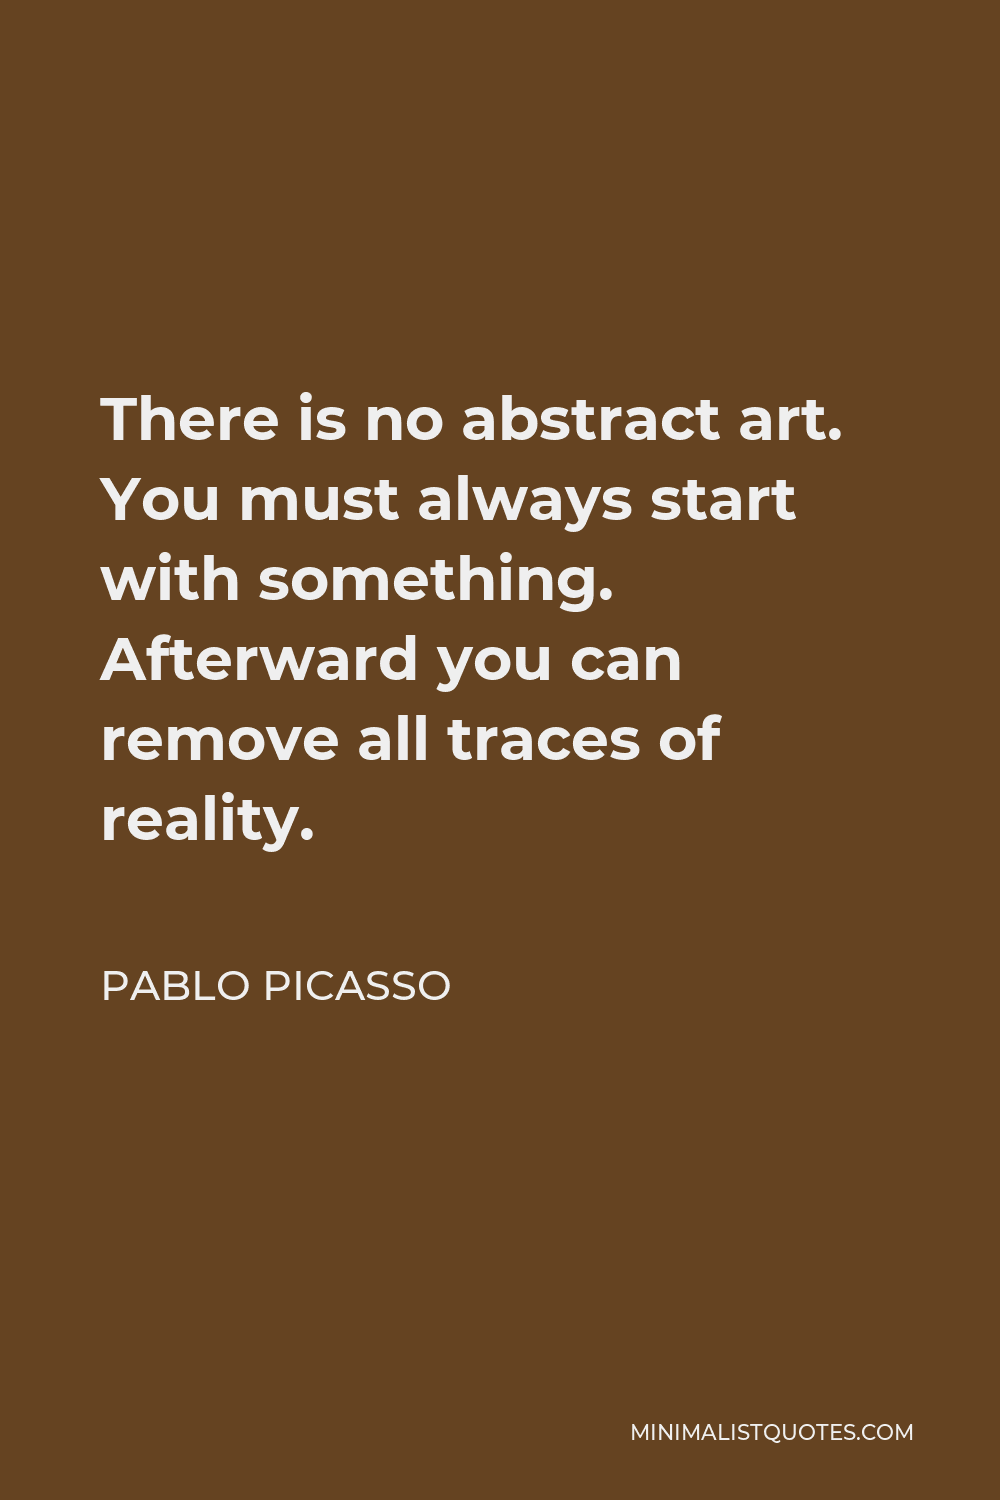 Pablo Picasso Quote - There is no abstract art. You must always start with something. Afterward you can remove all traces of reality.